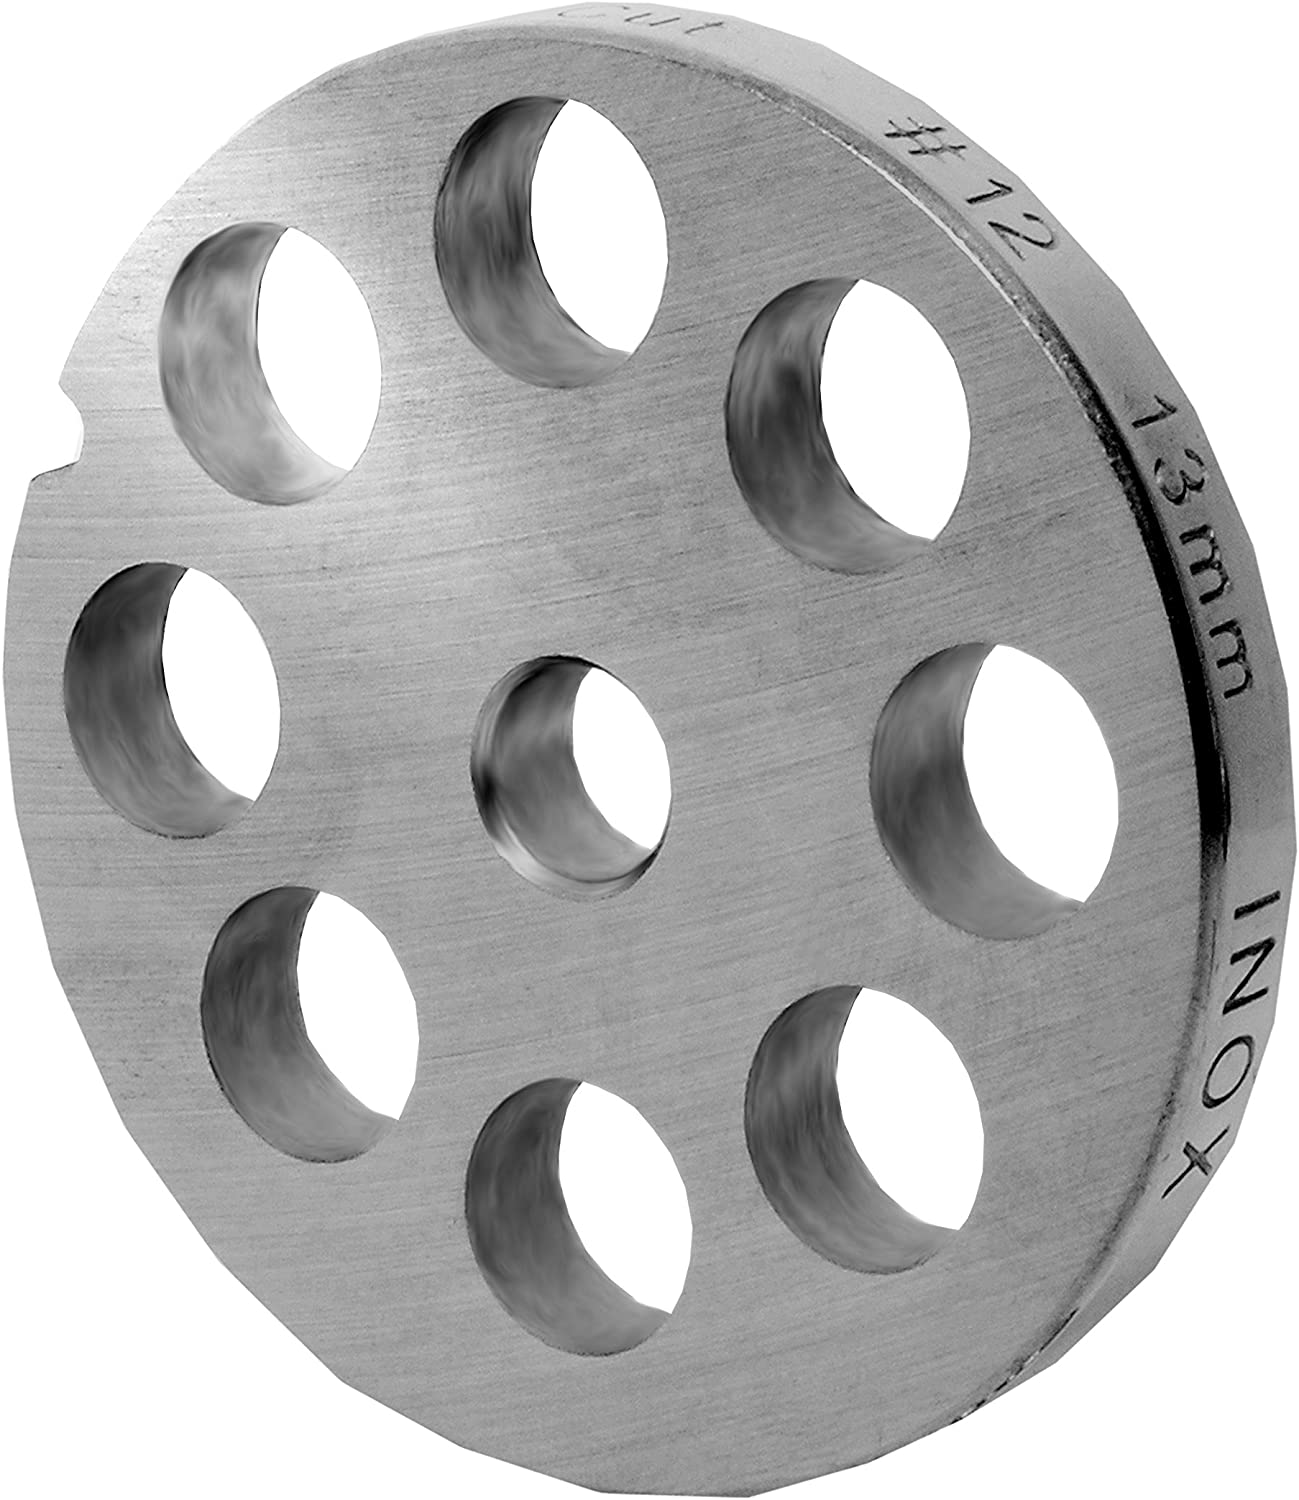 WolfCut Meat grinder discs suitable for Reber sizes 12 (13.0 mm)